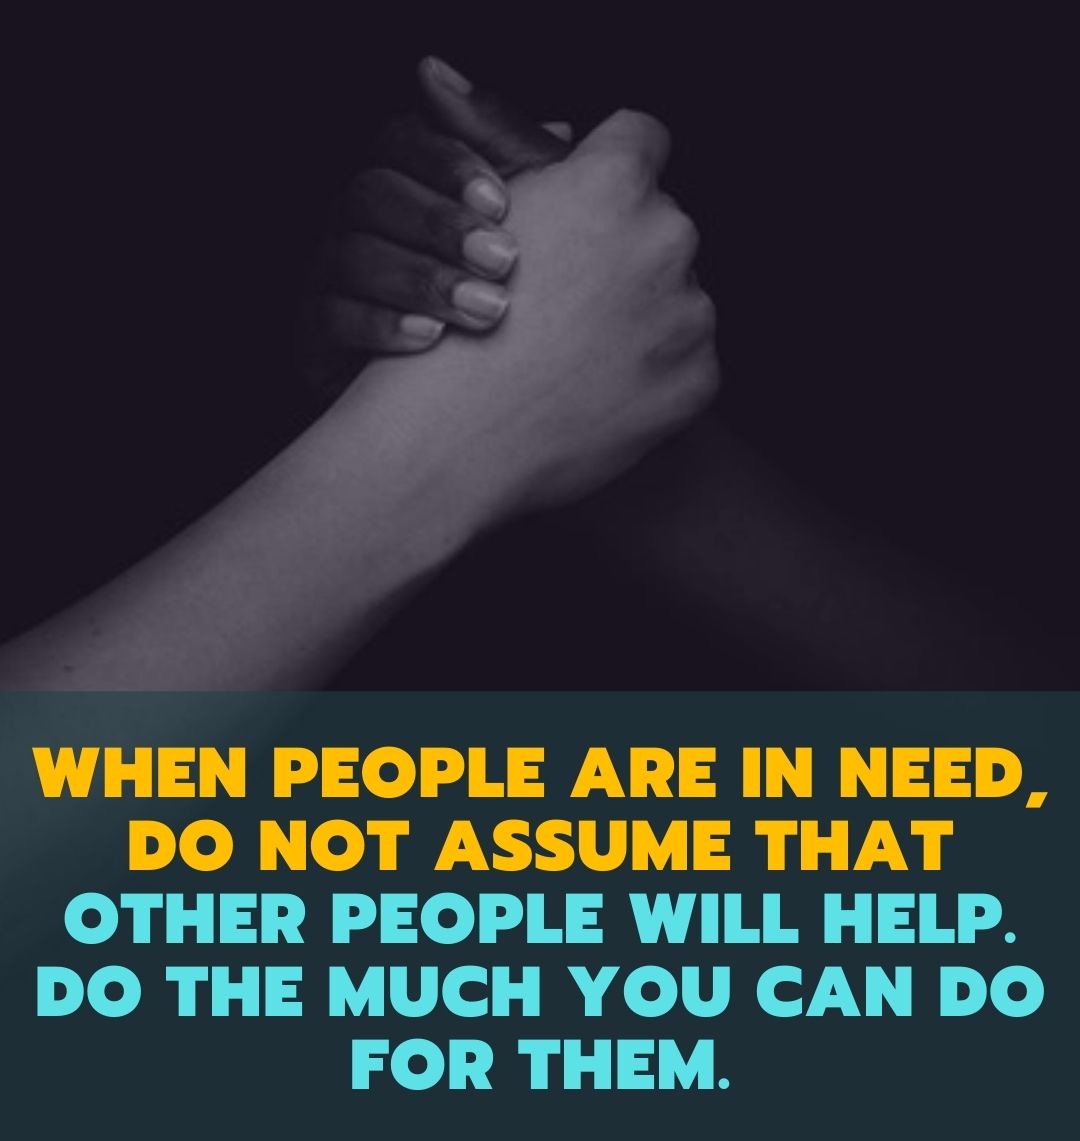 when people are in need, do not assume that other people will help. Do the much you can do for them.